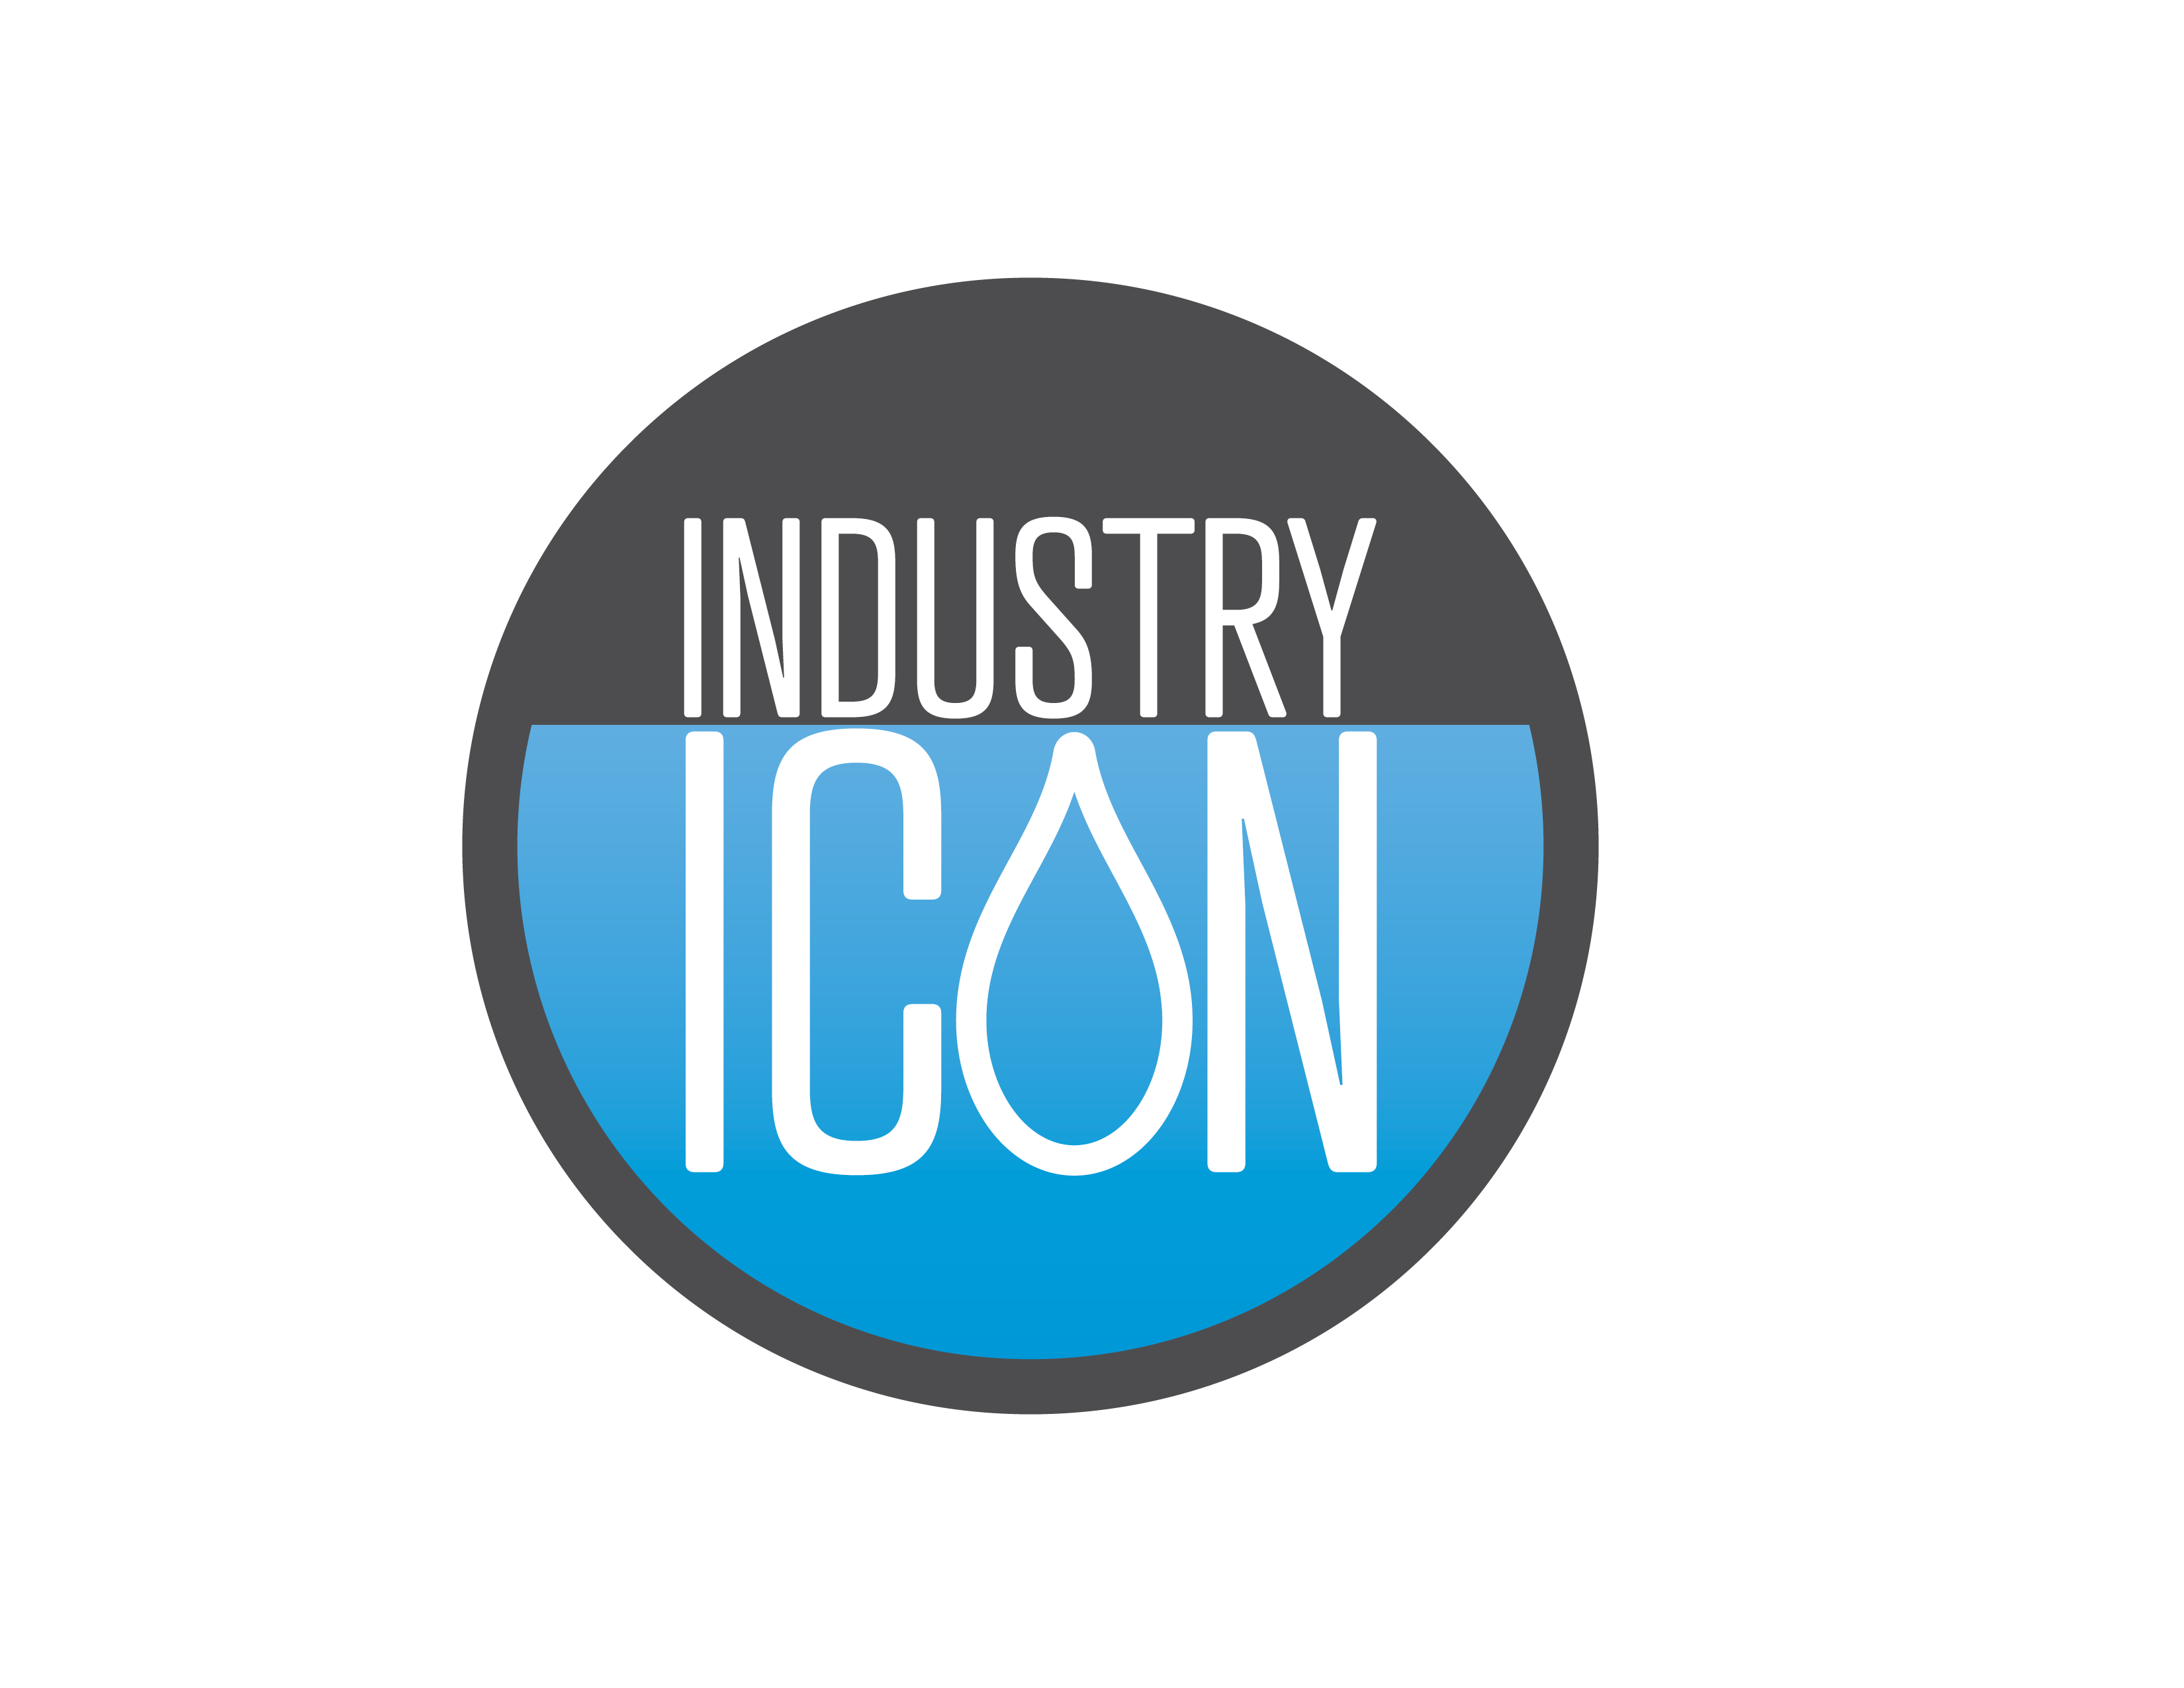 Industry with Blue Circle Logo - Industry Icon Award | WWD